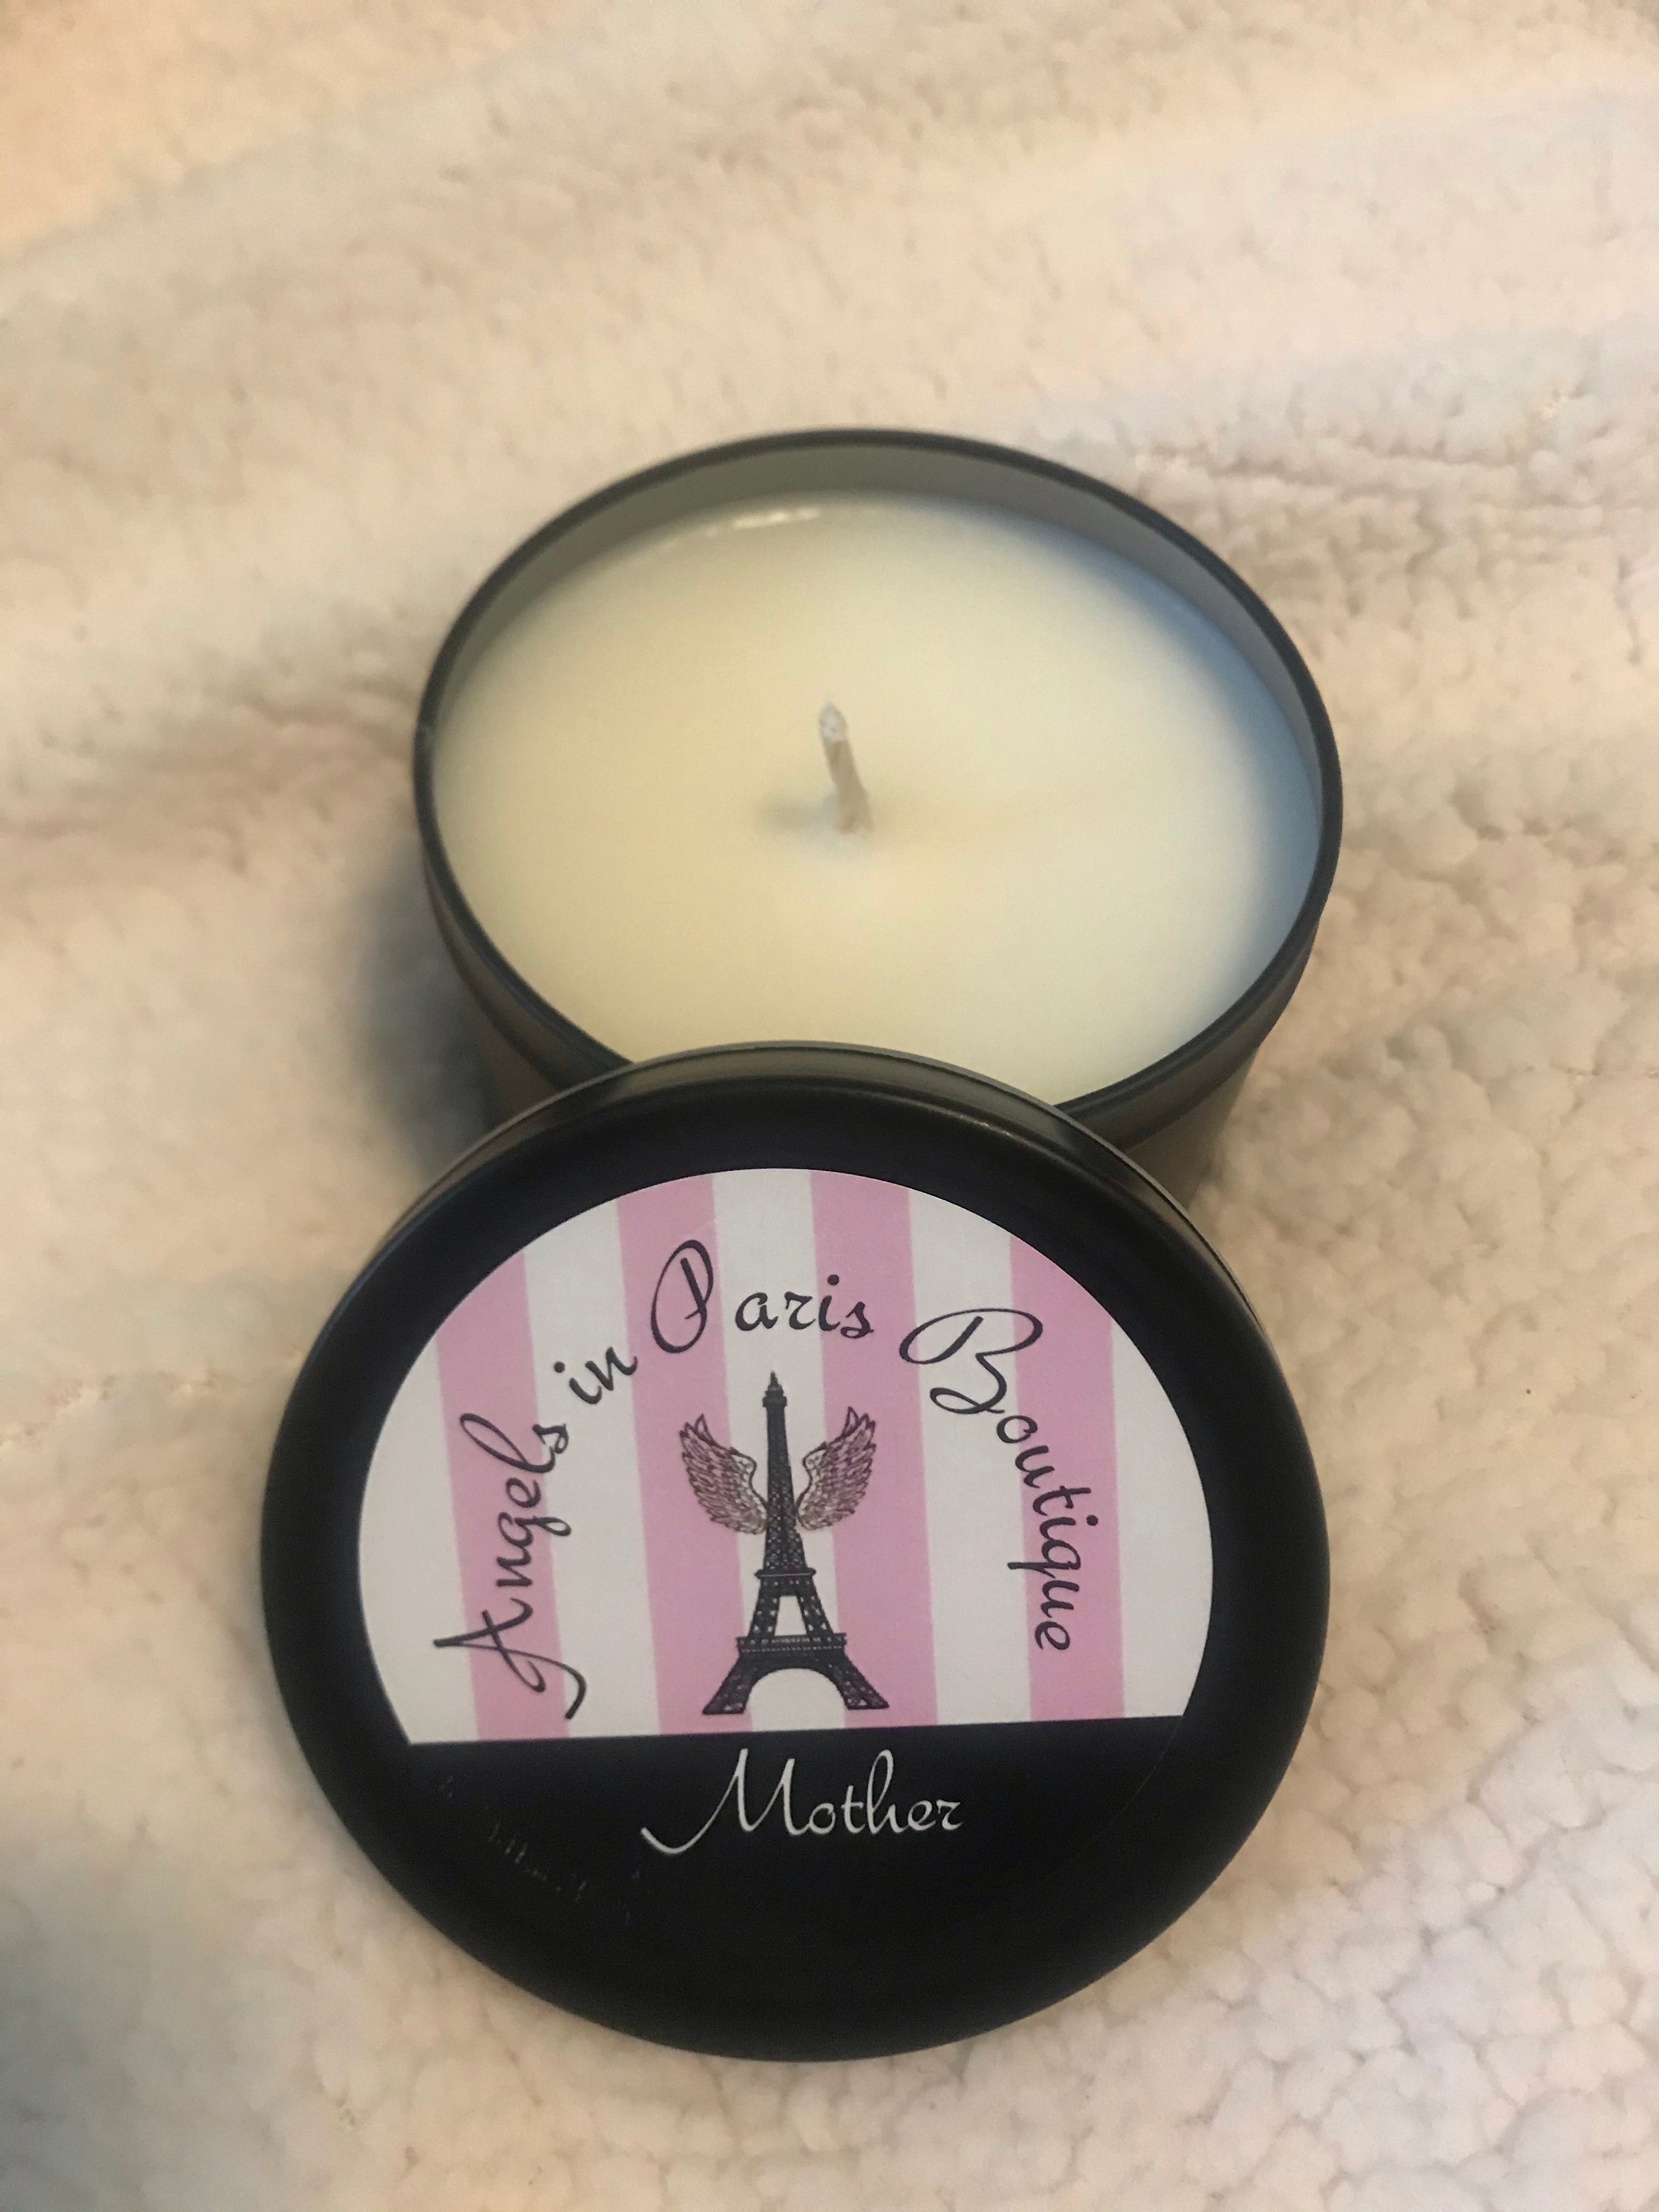 Wax and Oils Soy Wax Aromatherapy Scented Candles (Mother) 8 Ounces. Single